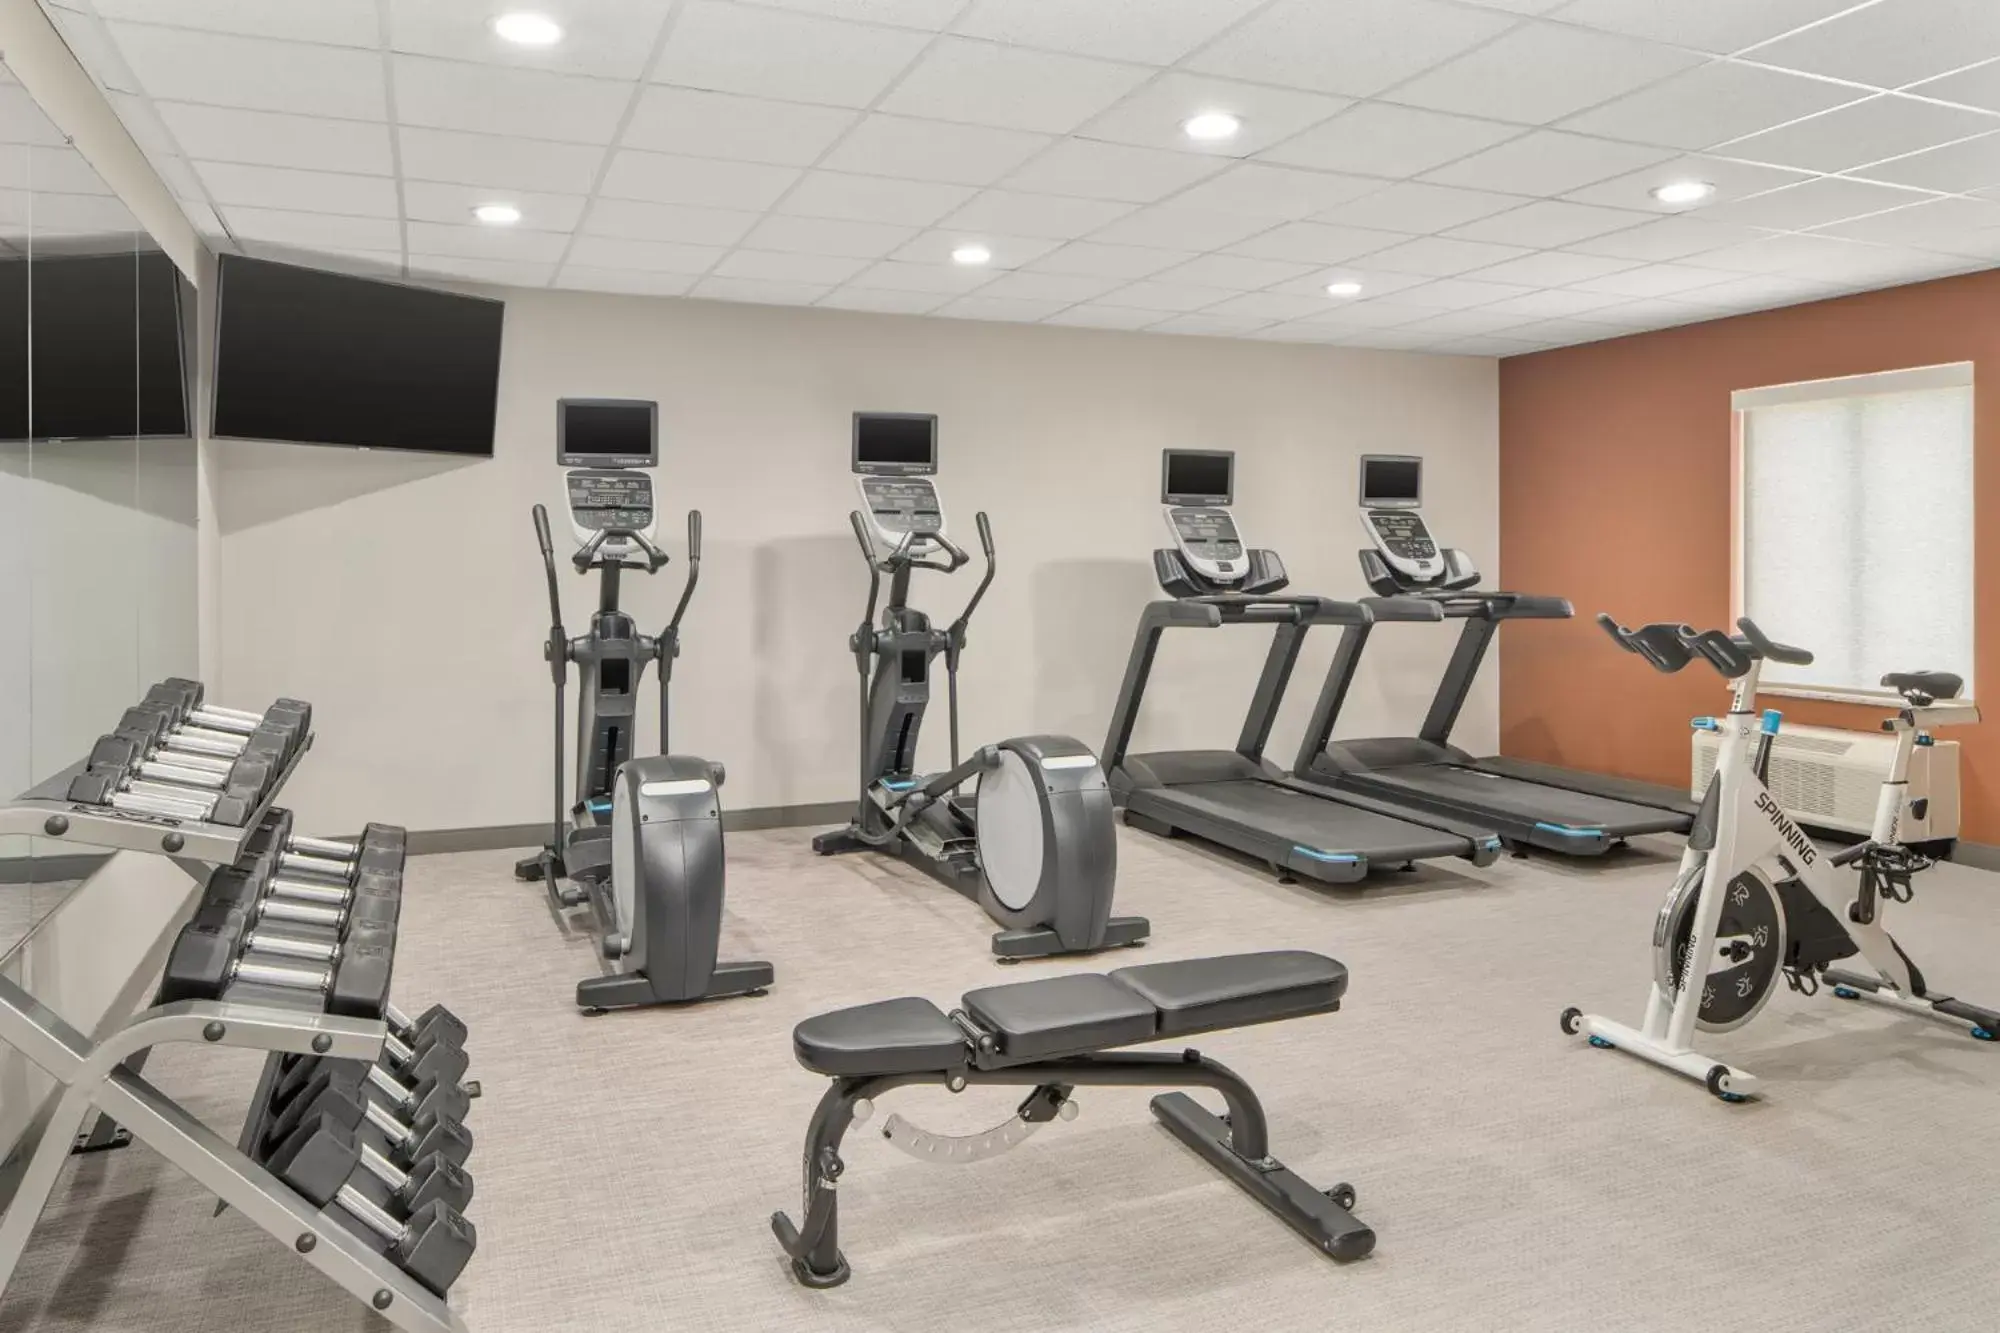 Fitness centre/facilities, Fitness Center/Facilities in Candlewood Suites - Newnan - Atlanta SW, an IHG Hotel